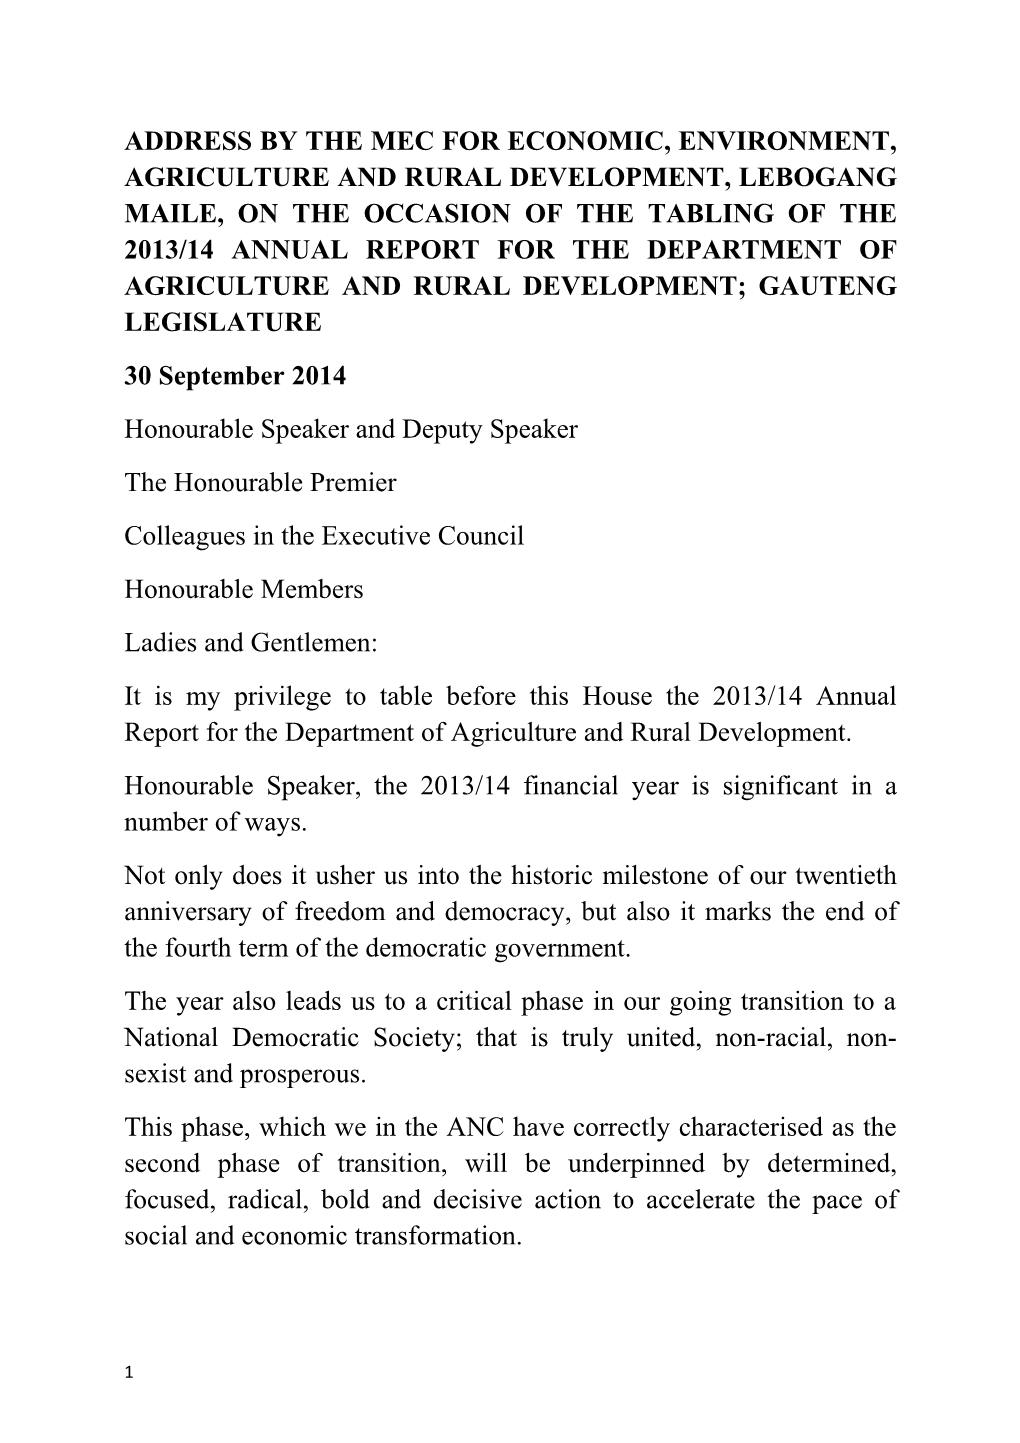 MEC Lebohang Maile Speech on the Tabling of the Department of Agriculture Annual Report